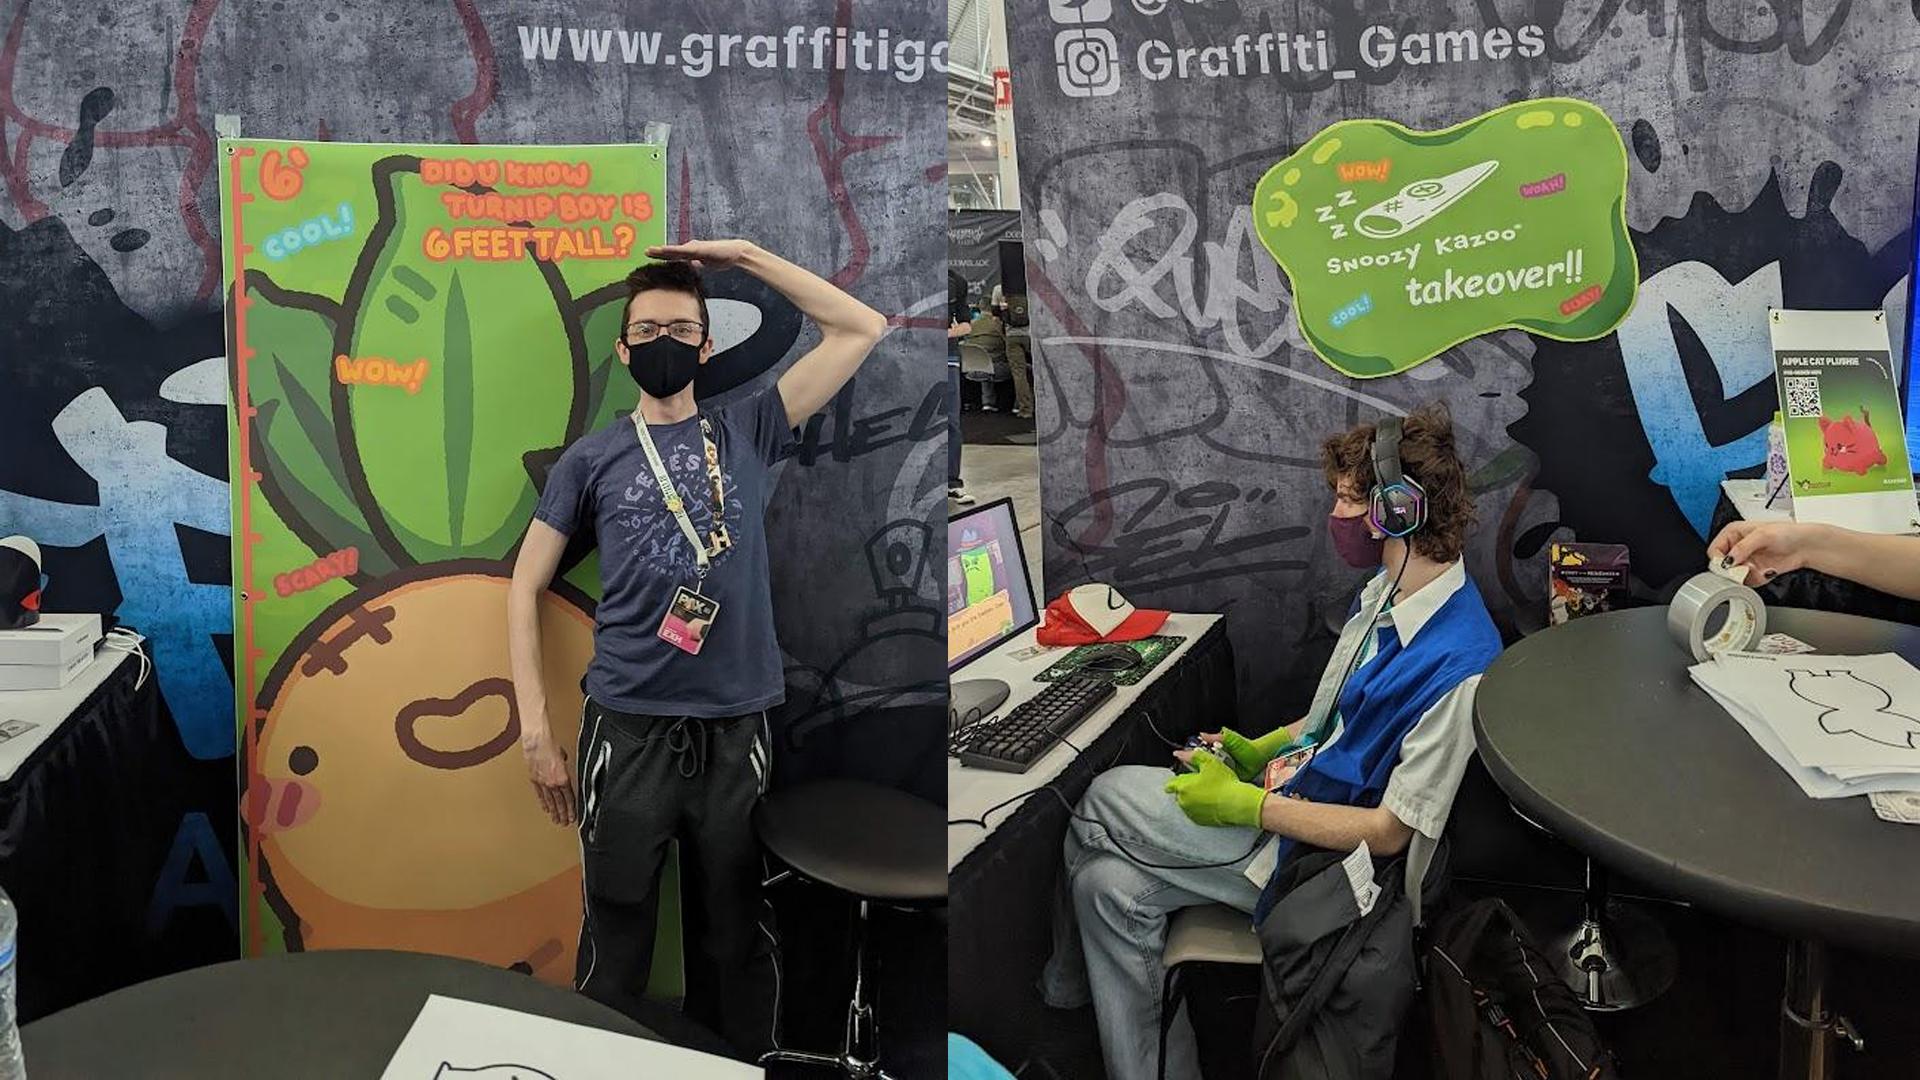 Someone playing our demo and Carson standing next to the 6ft tall Turnip Boy banner!